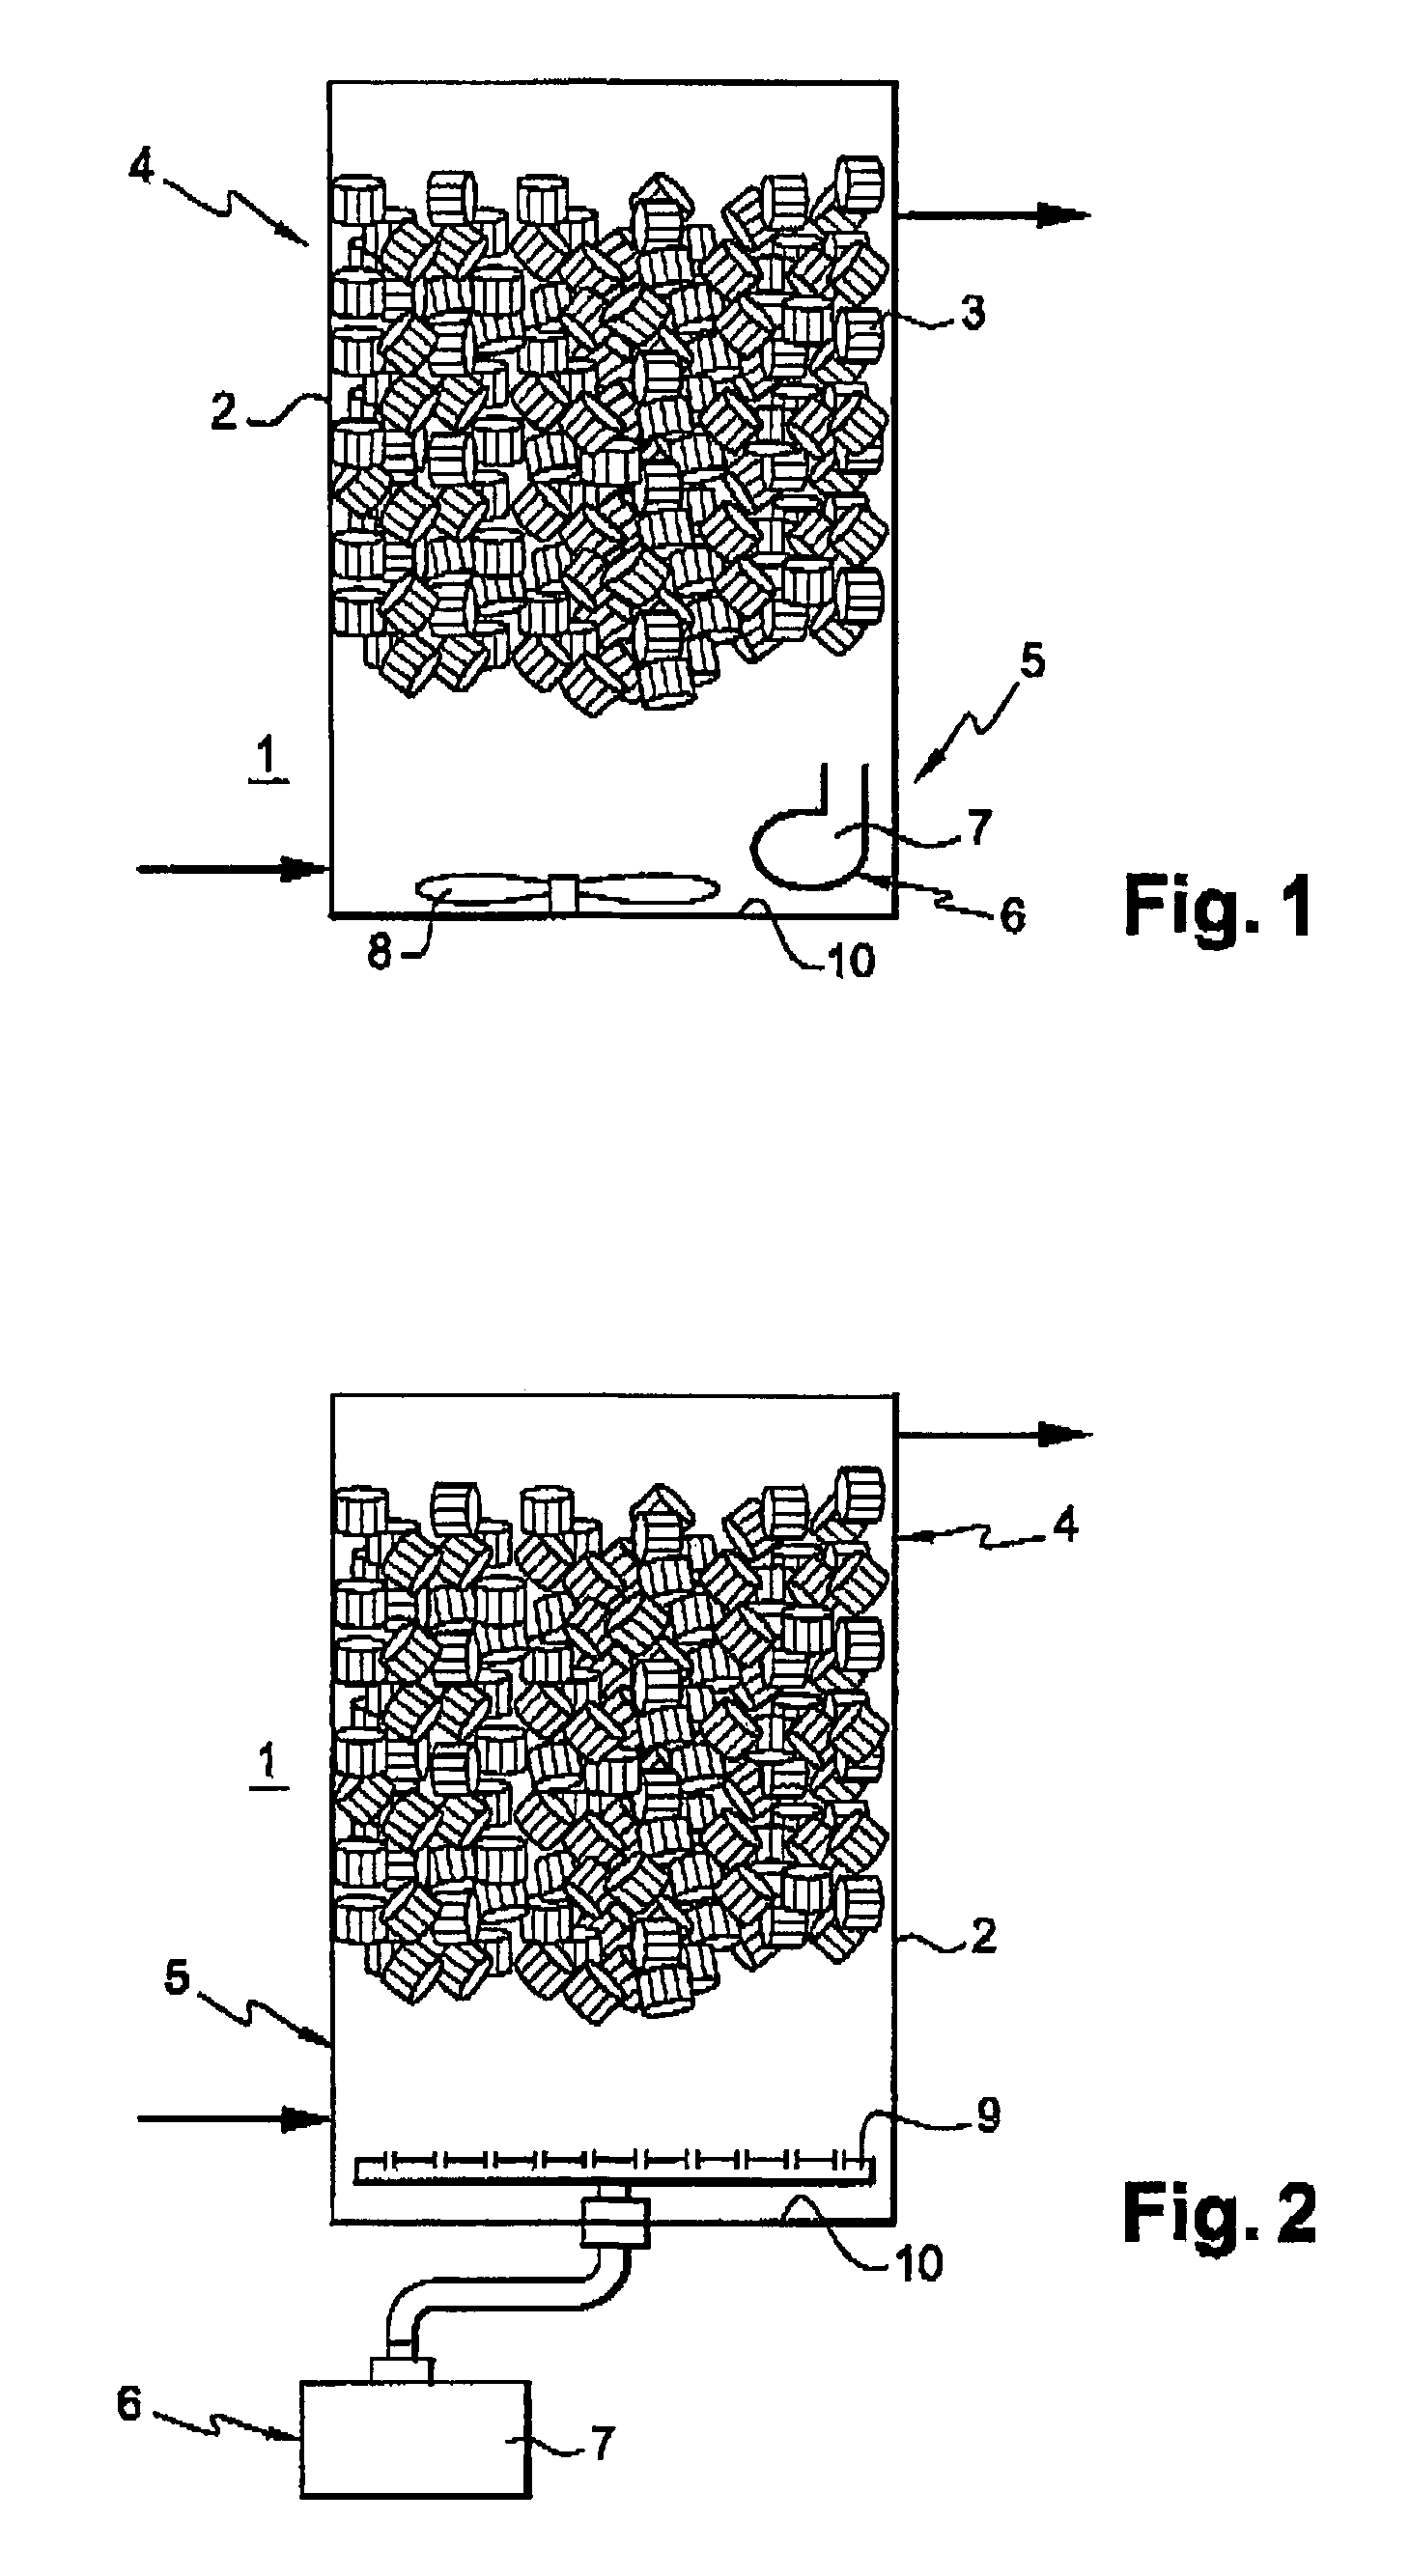 Method for purifying effluent in an anaerobic reactor